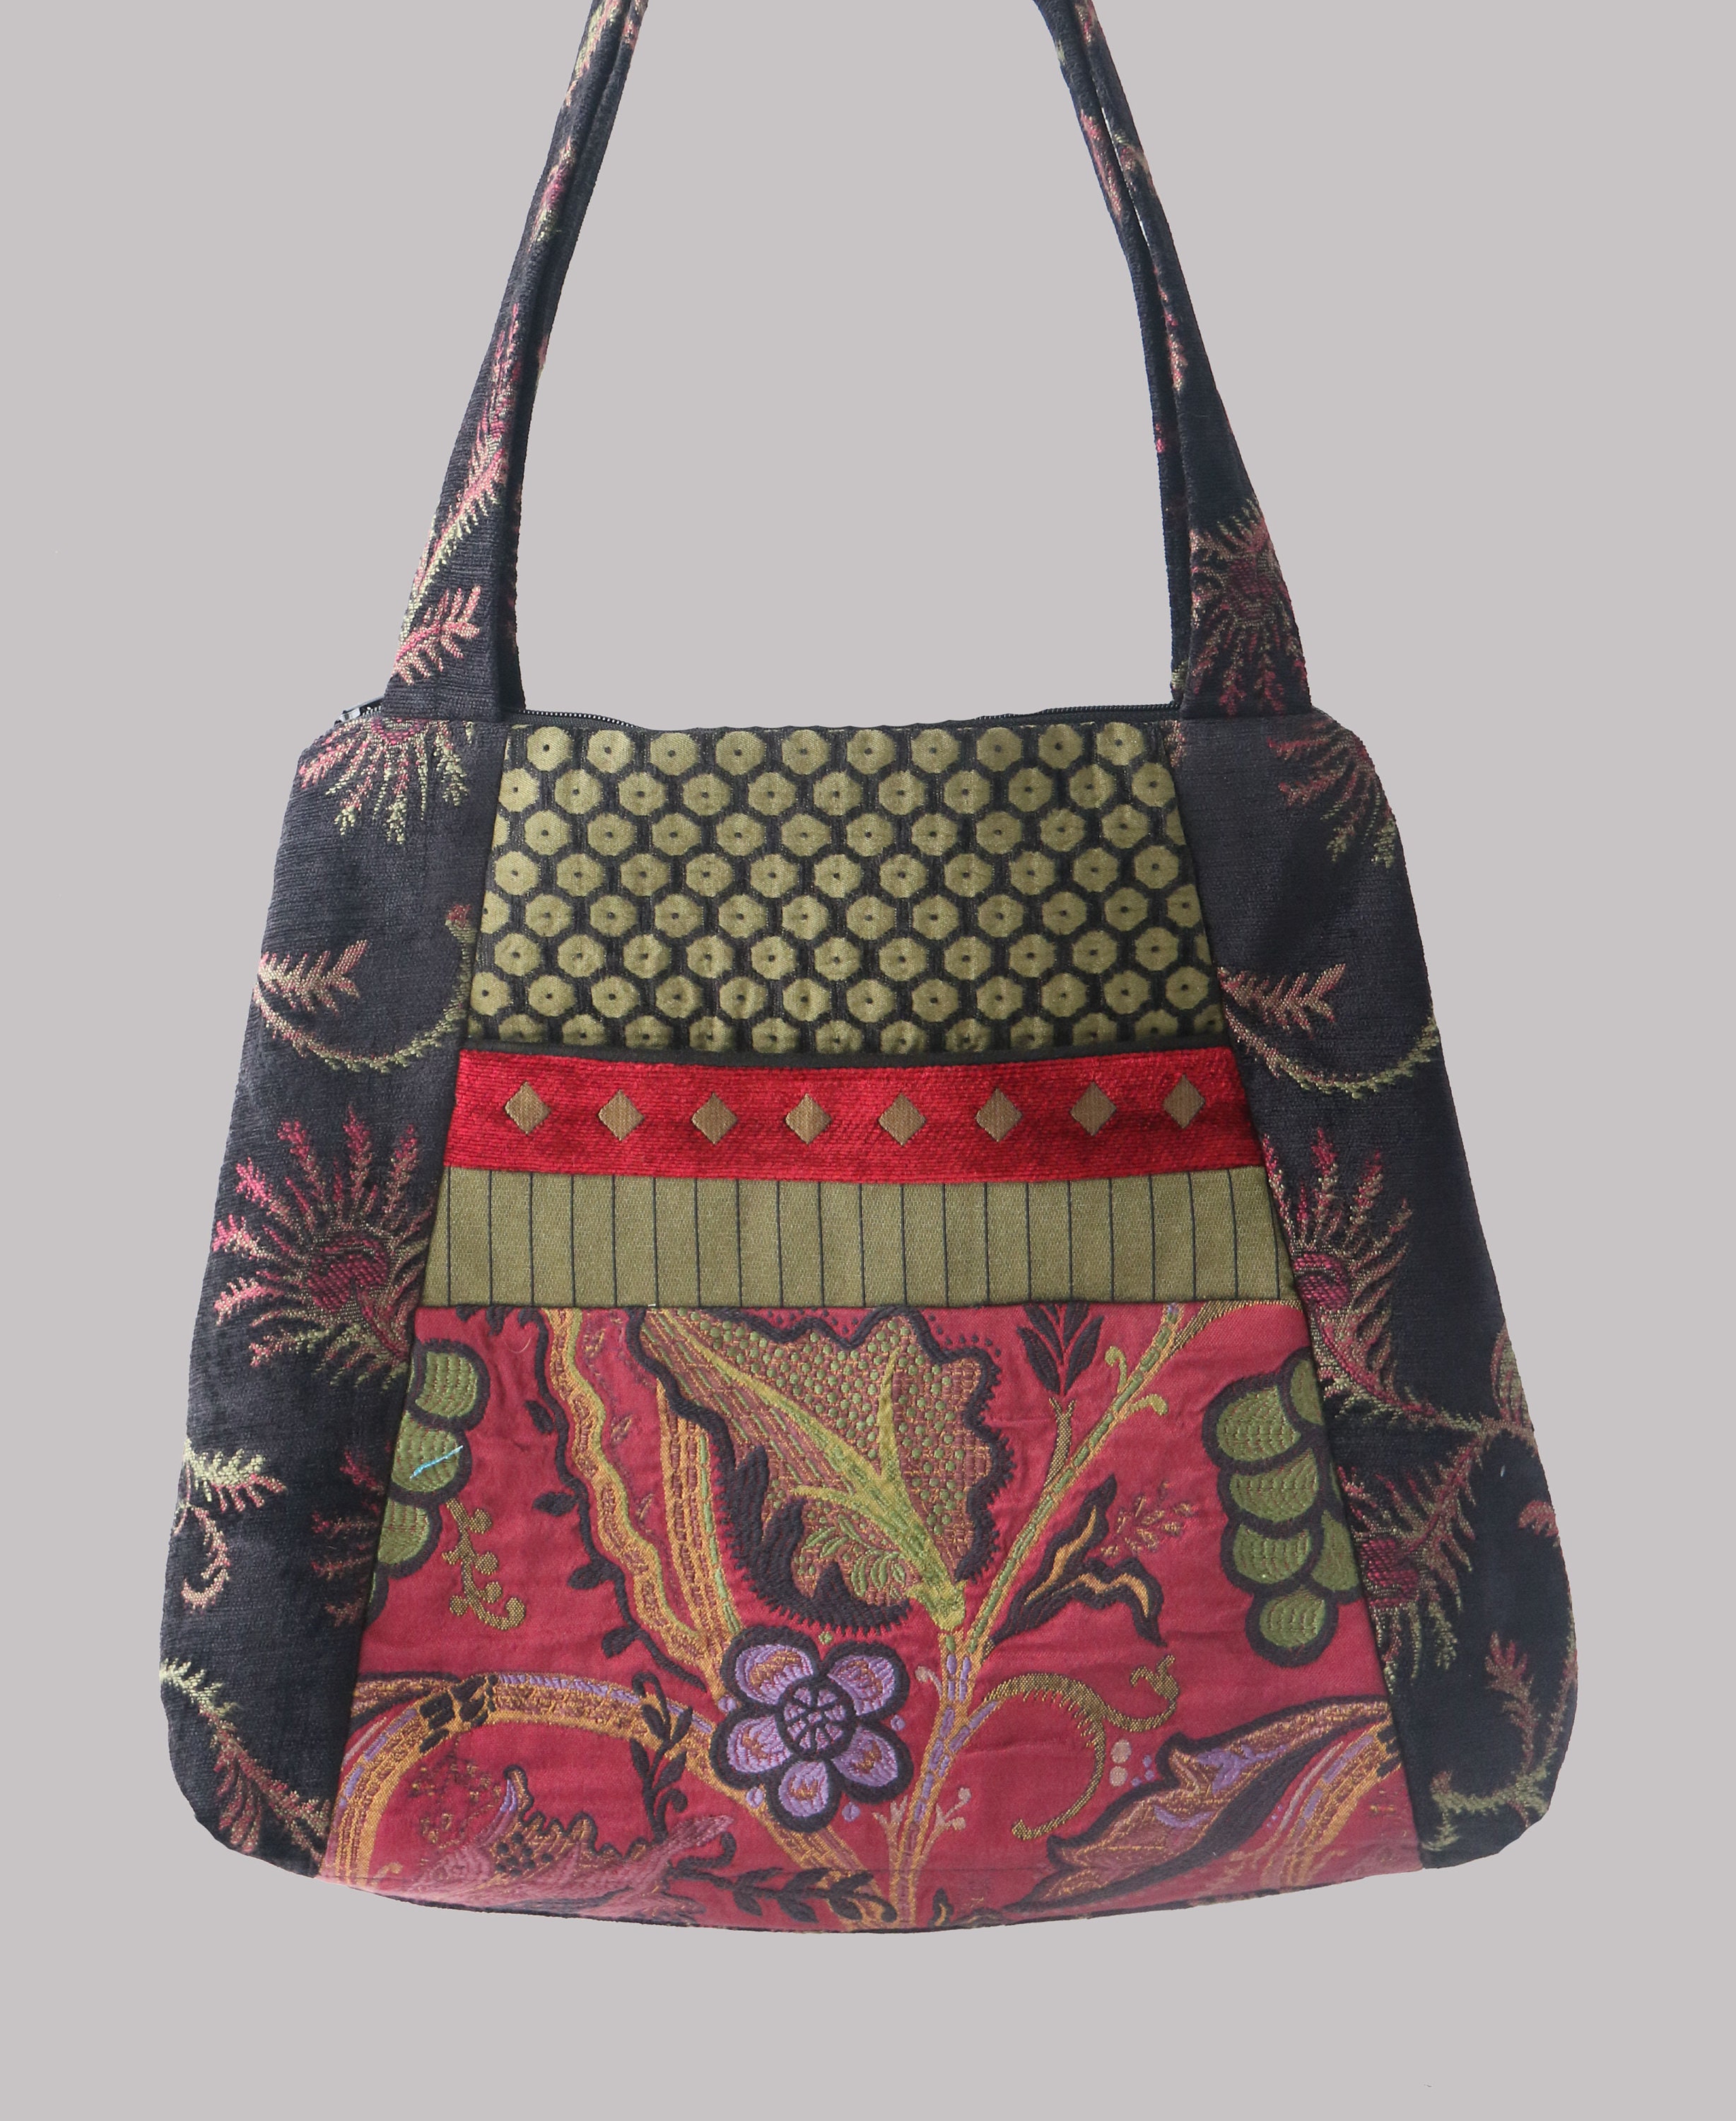 Merlot Tapestry Tote Bag in Red Black and Sage Floral - Etsy